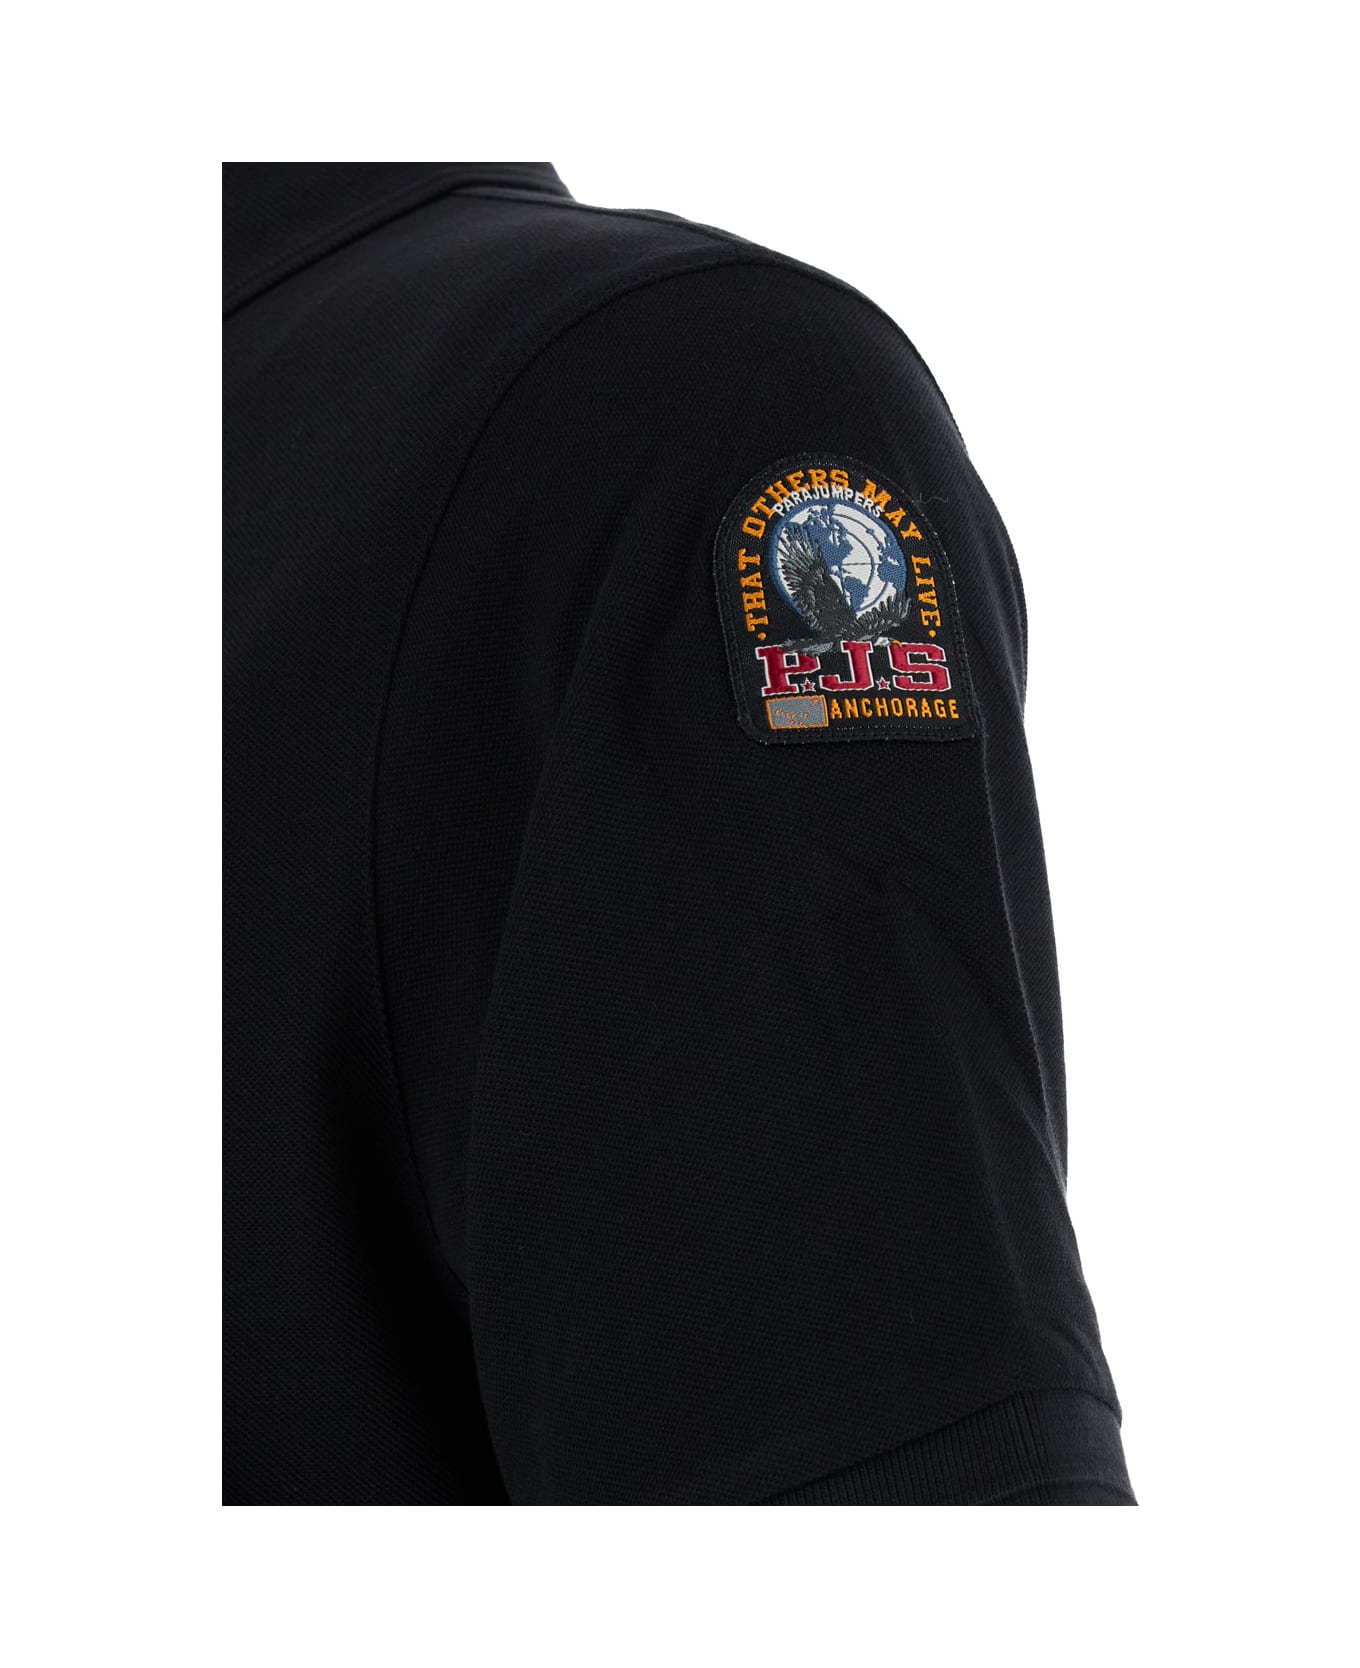 Parajumpers Black Polo Shirt In Cotton Man - Black